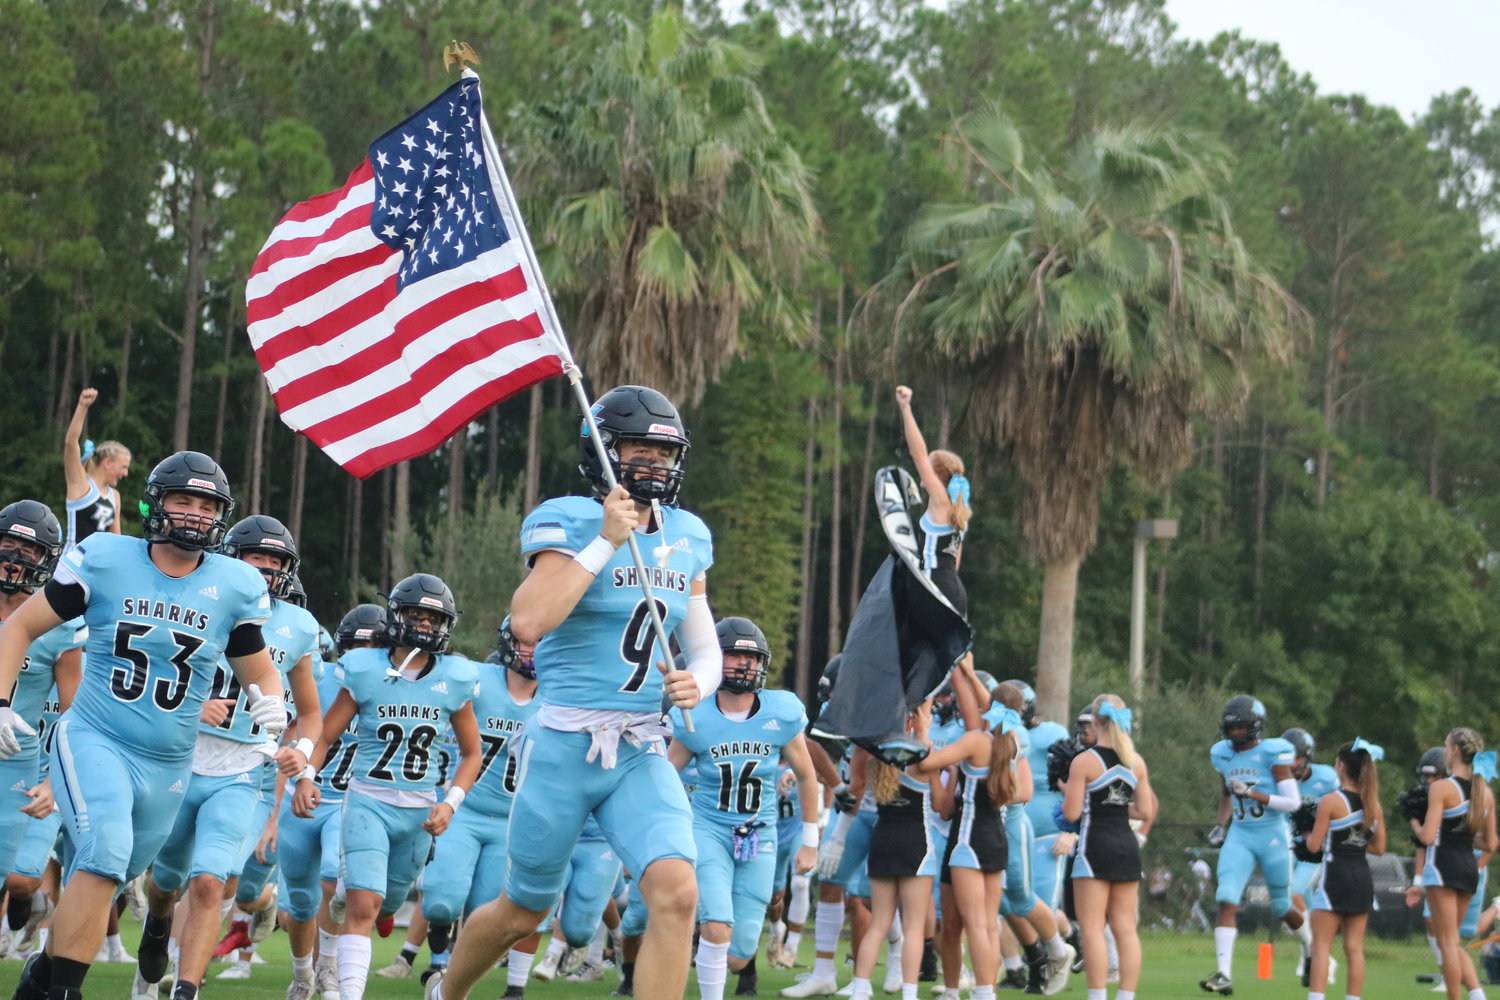 Luke Pirris leads the Sharks onto the football field while carrying an American flag.